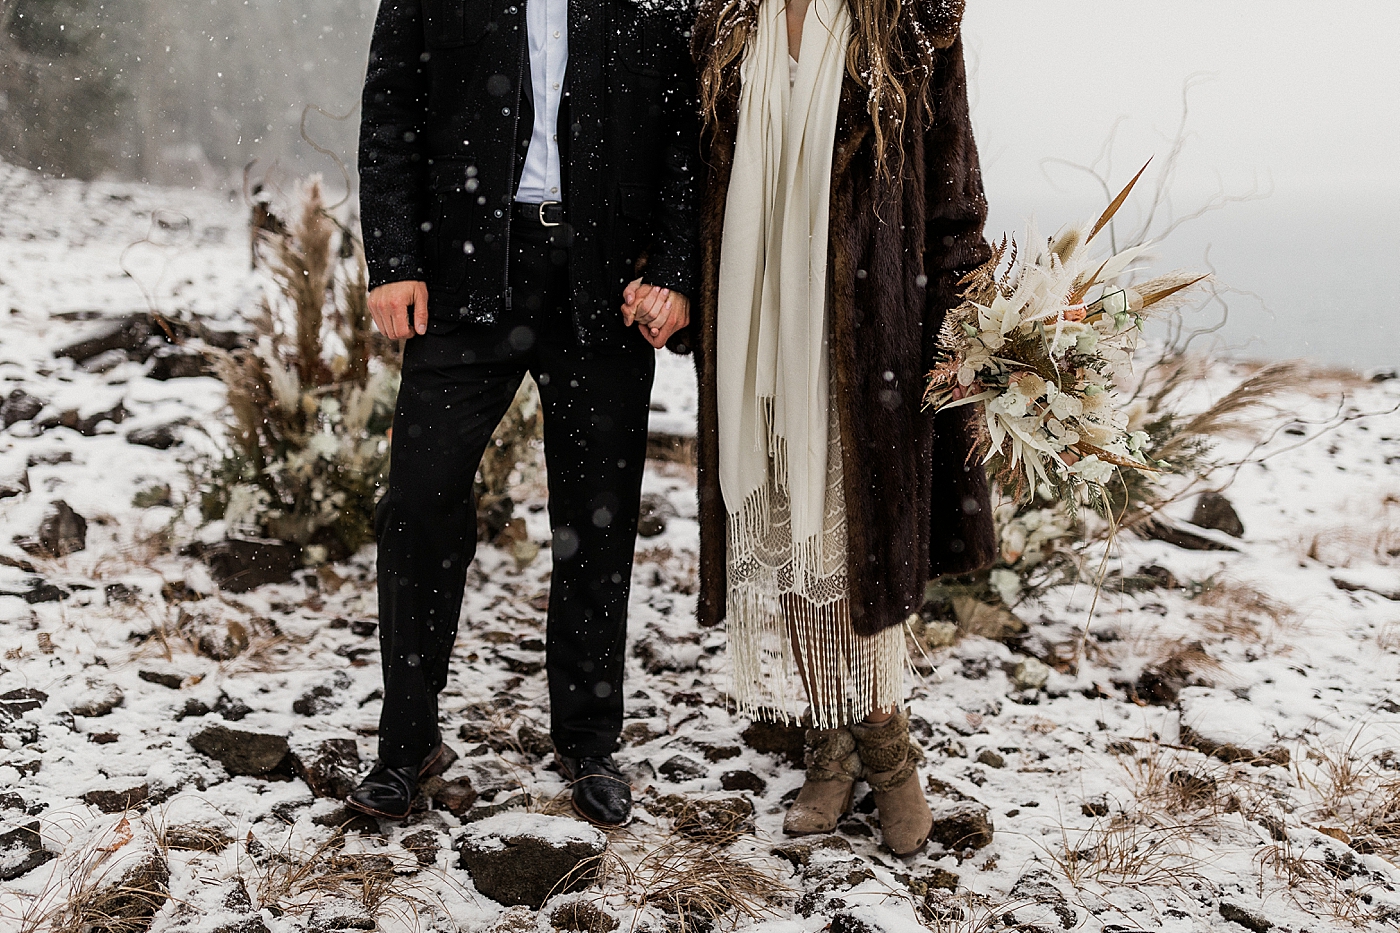 PNW Winter Elopement at Lake Kachess in the snow. Photos by Elopement Photographer, Megan Montalvo Photography